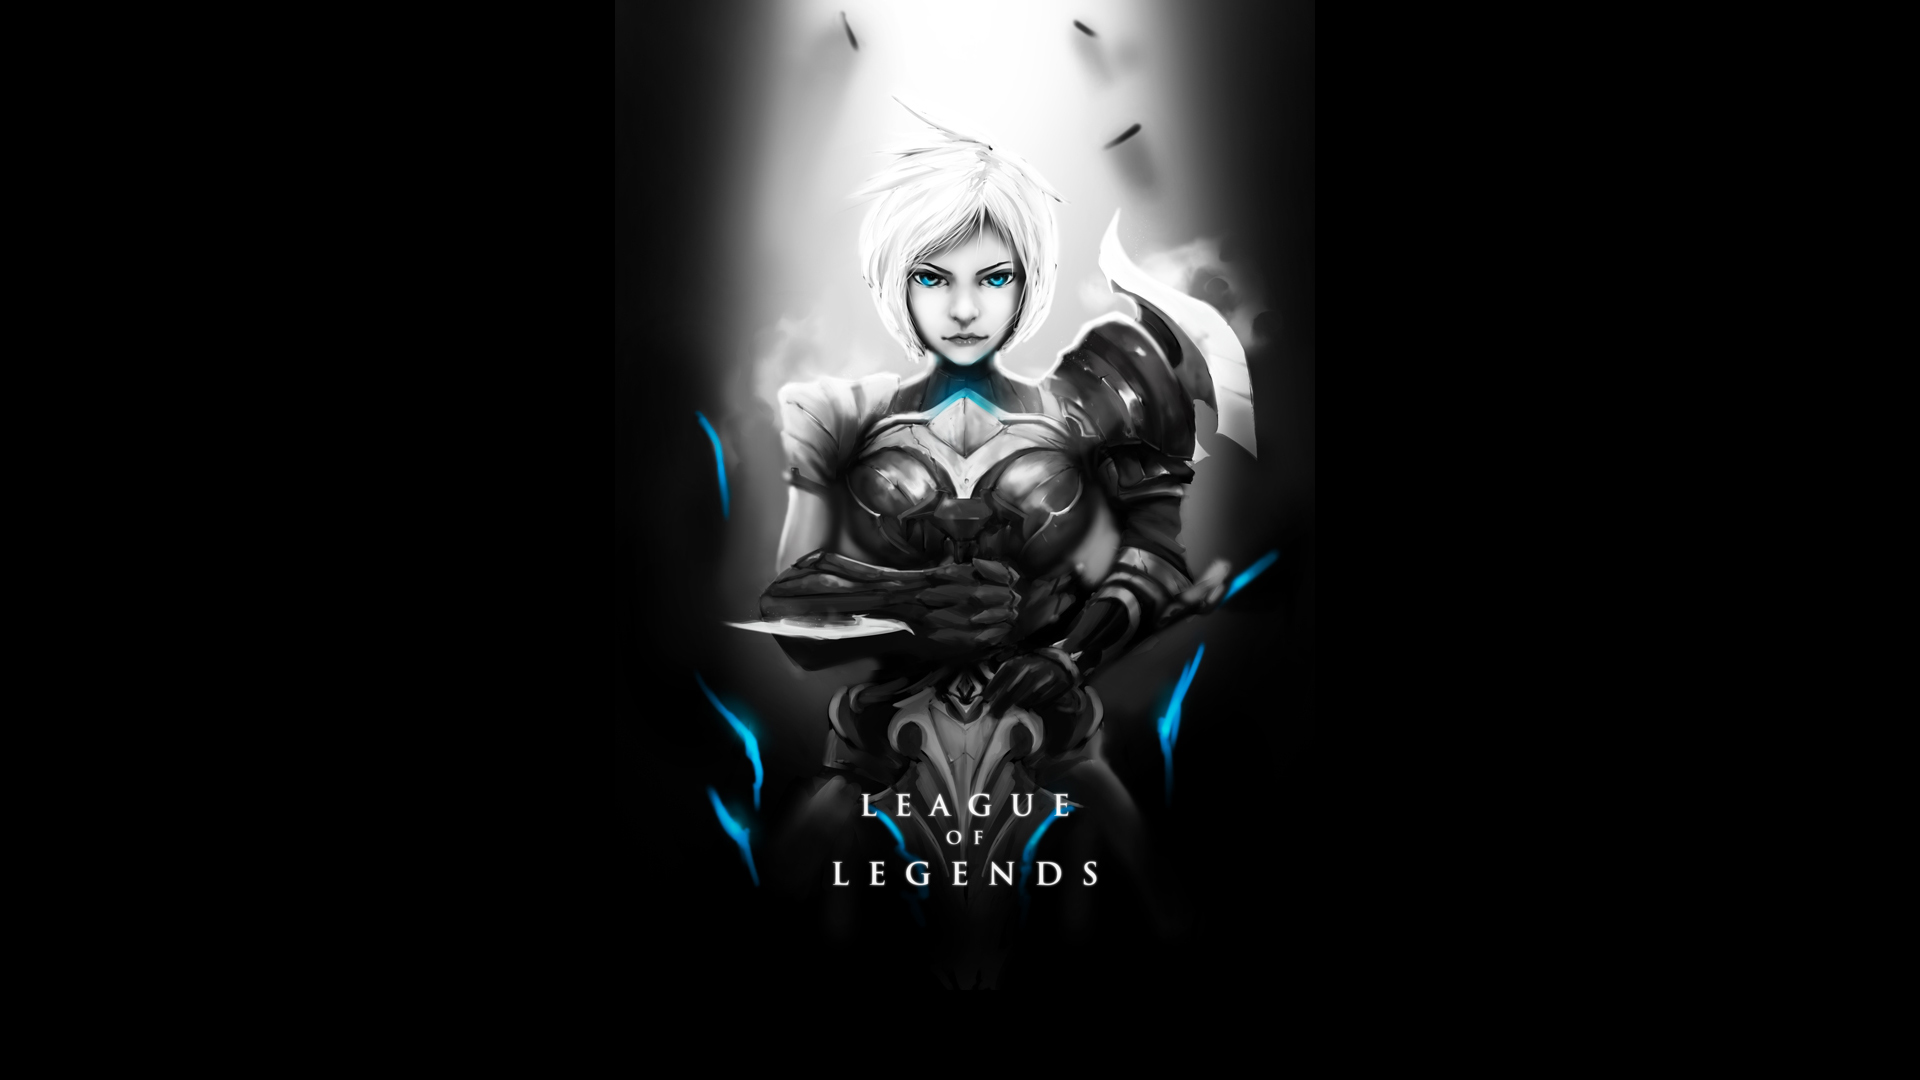 League Of Legends Riven Moba Game HD Wallpaper Car Pictures